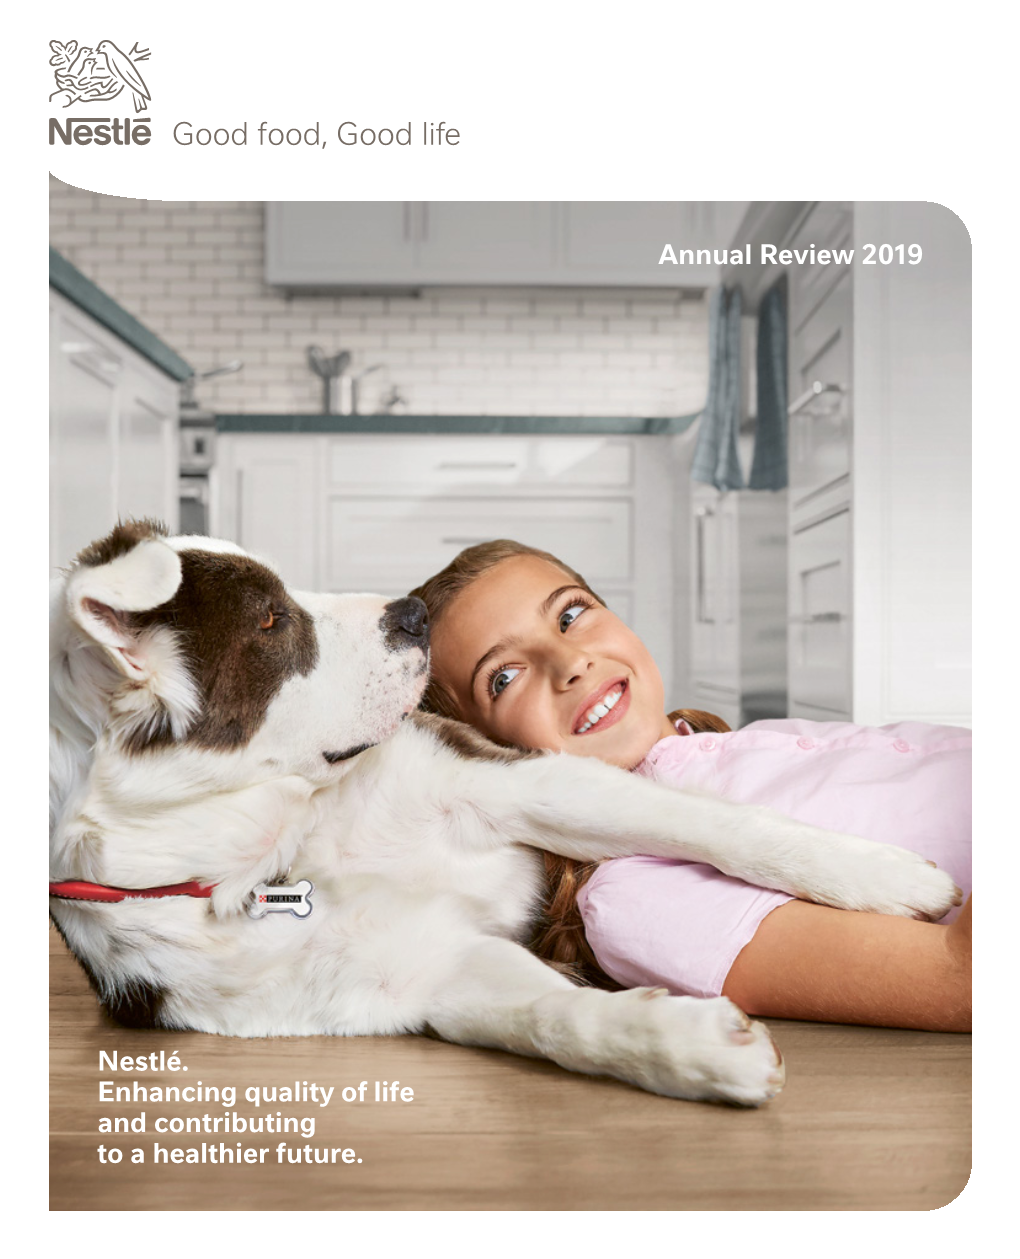 Nestlé. Enhancing Quality of Life and Contributing to a Healthier Future. Annual Review 2019